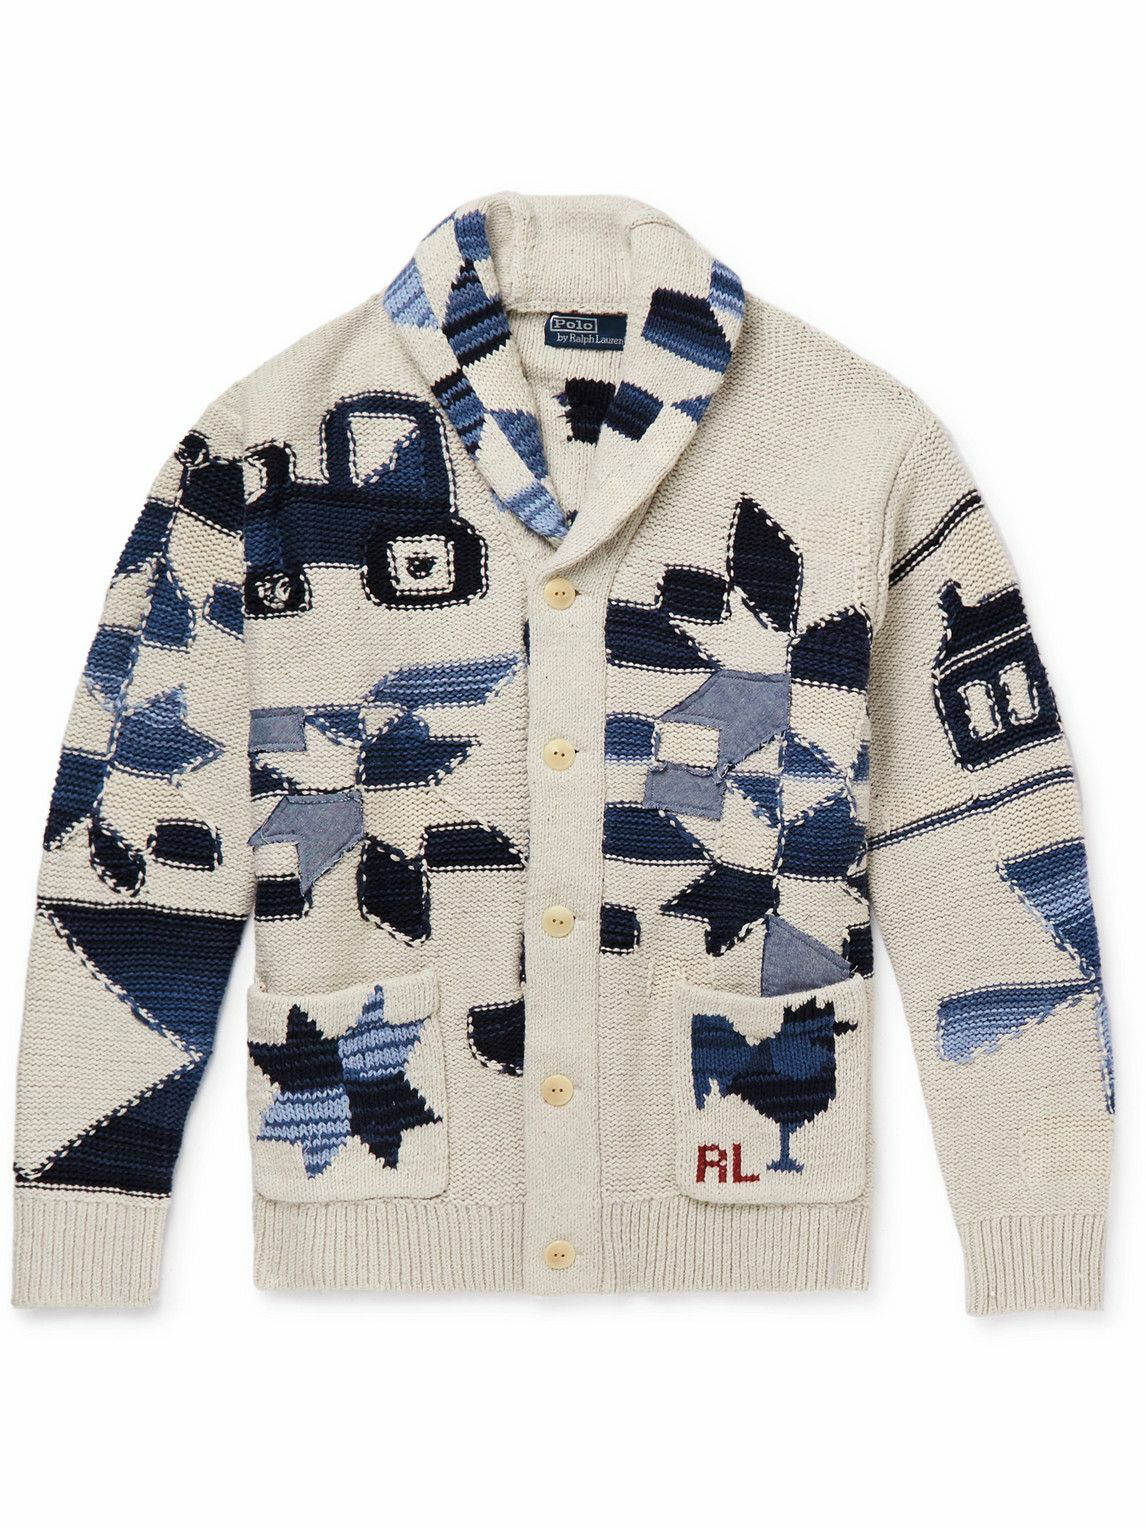 Polo by Ralph Lauren, Sweaters, Polo Ralph Lauren Jacquard Shortsleeve  Sweater Large